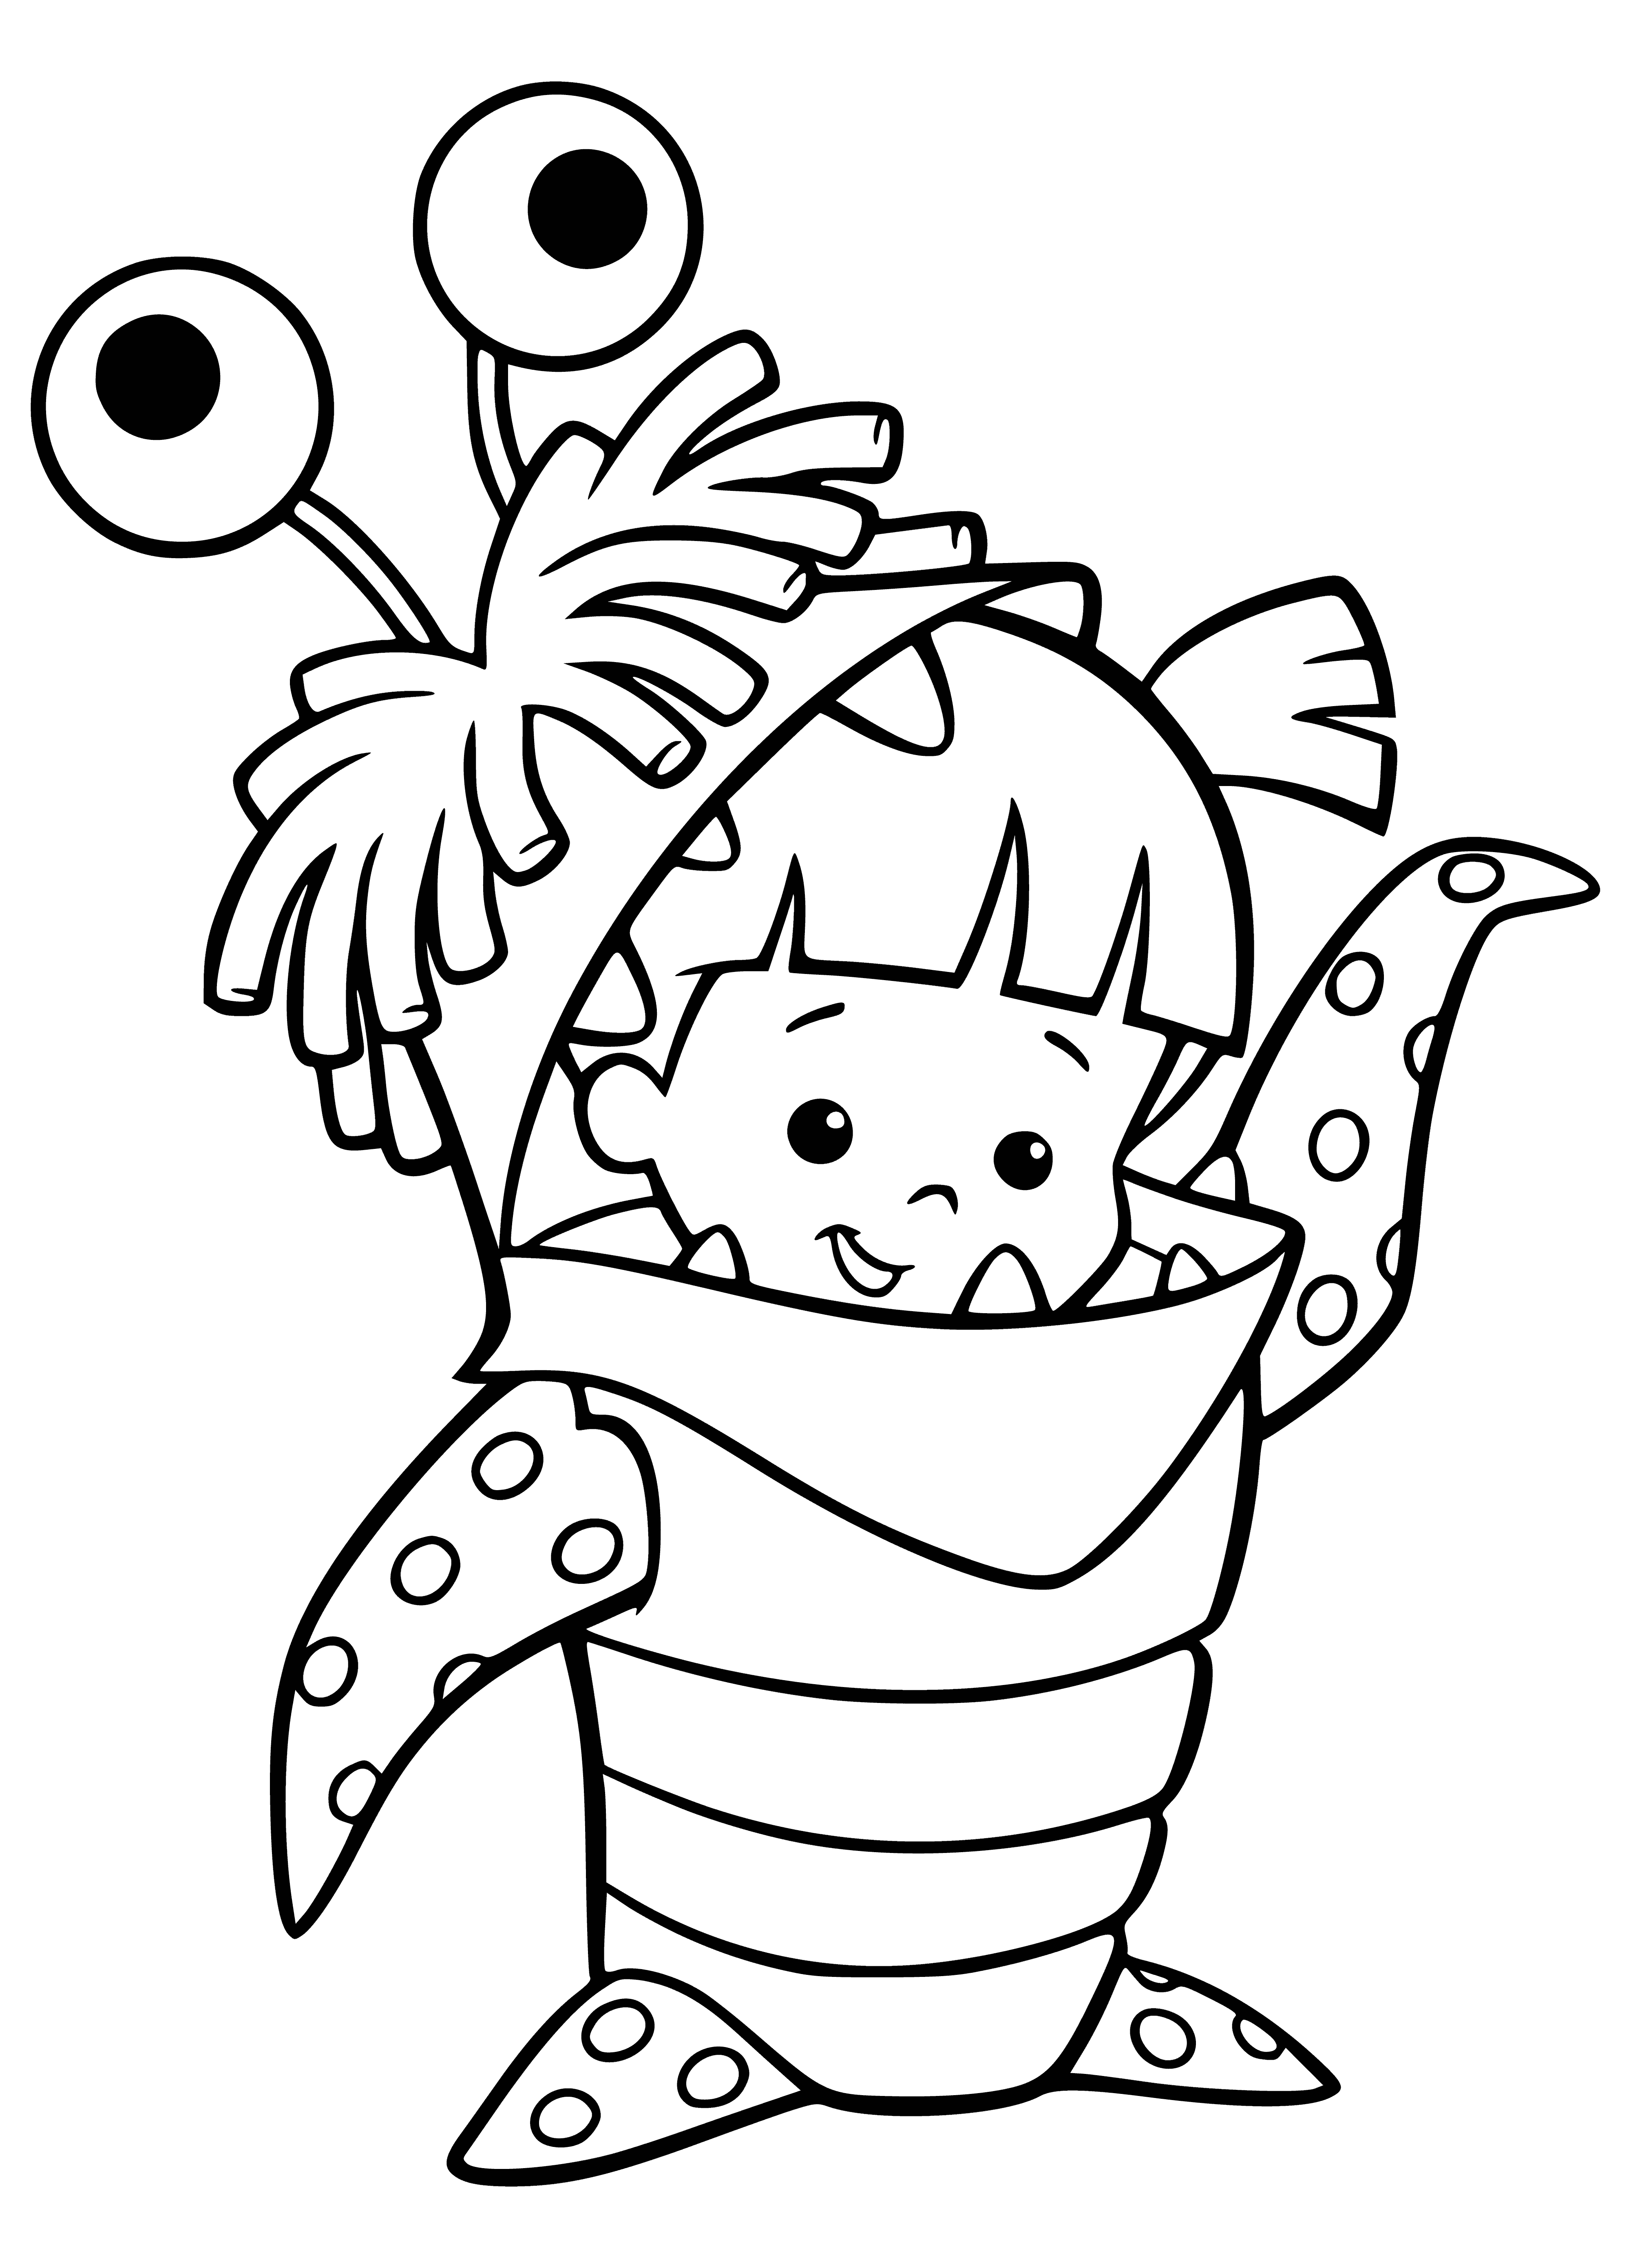 coloring page: A straw creature with pumpkin head wearing a black hat & bowtie, long thin arms & legs, large mouth with sharp teeth.